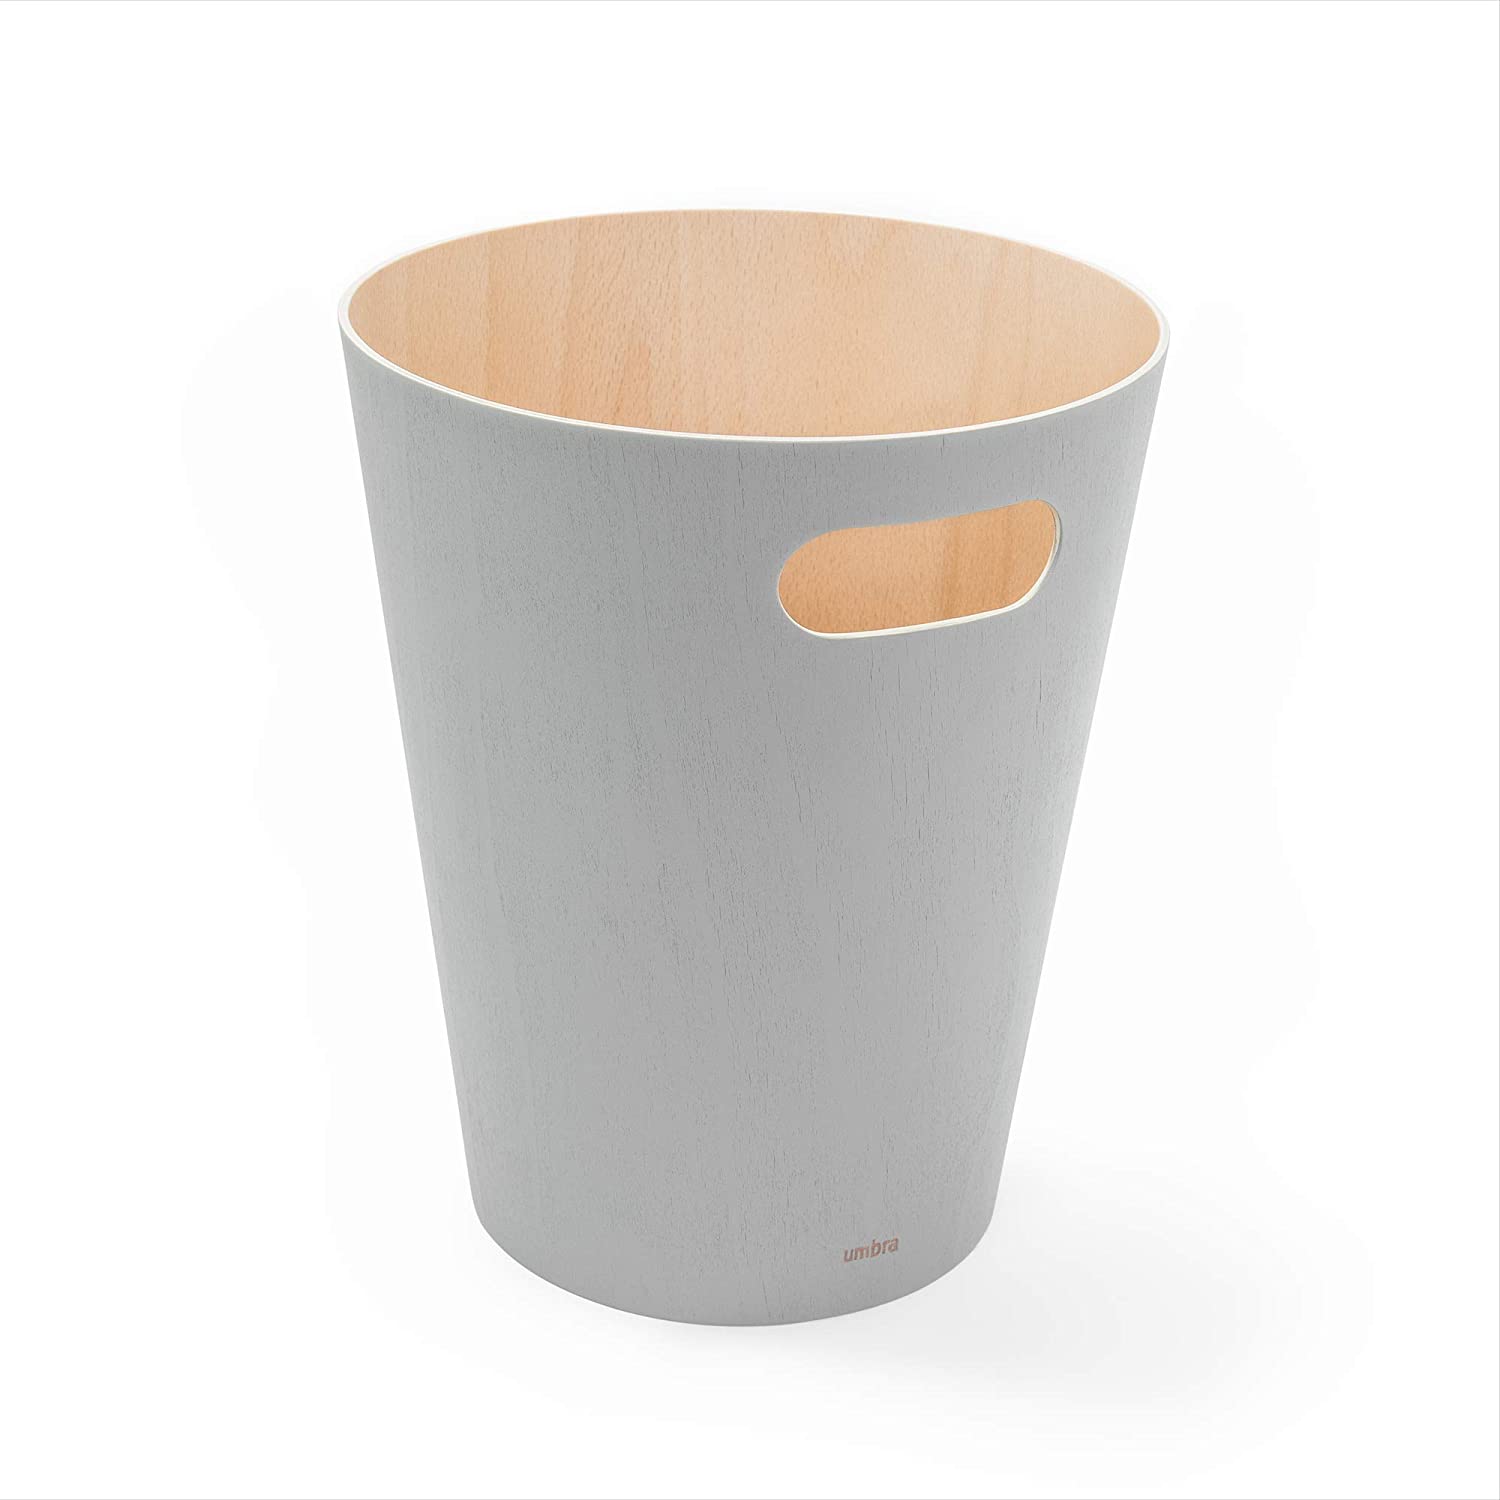 Umbra Woodrow Wastepaper Bin For The Office, Bathroom, Living Room And More